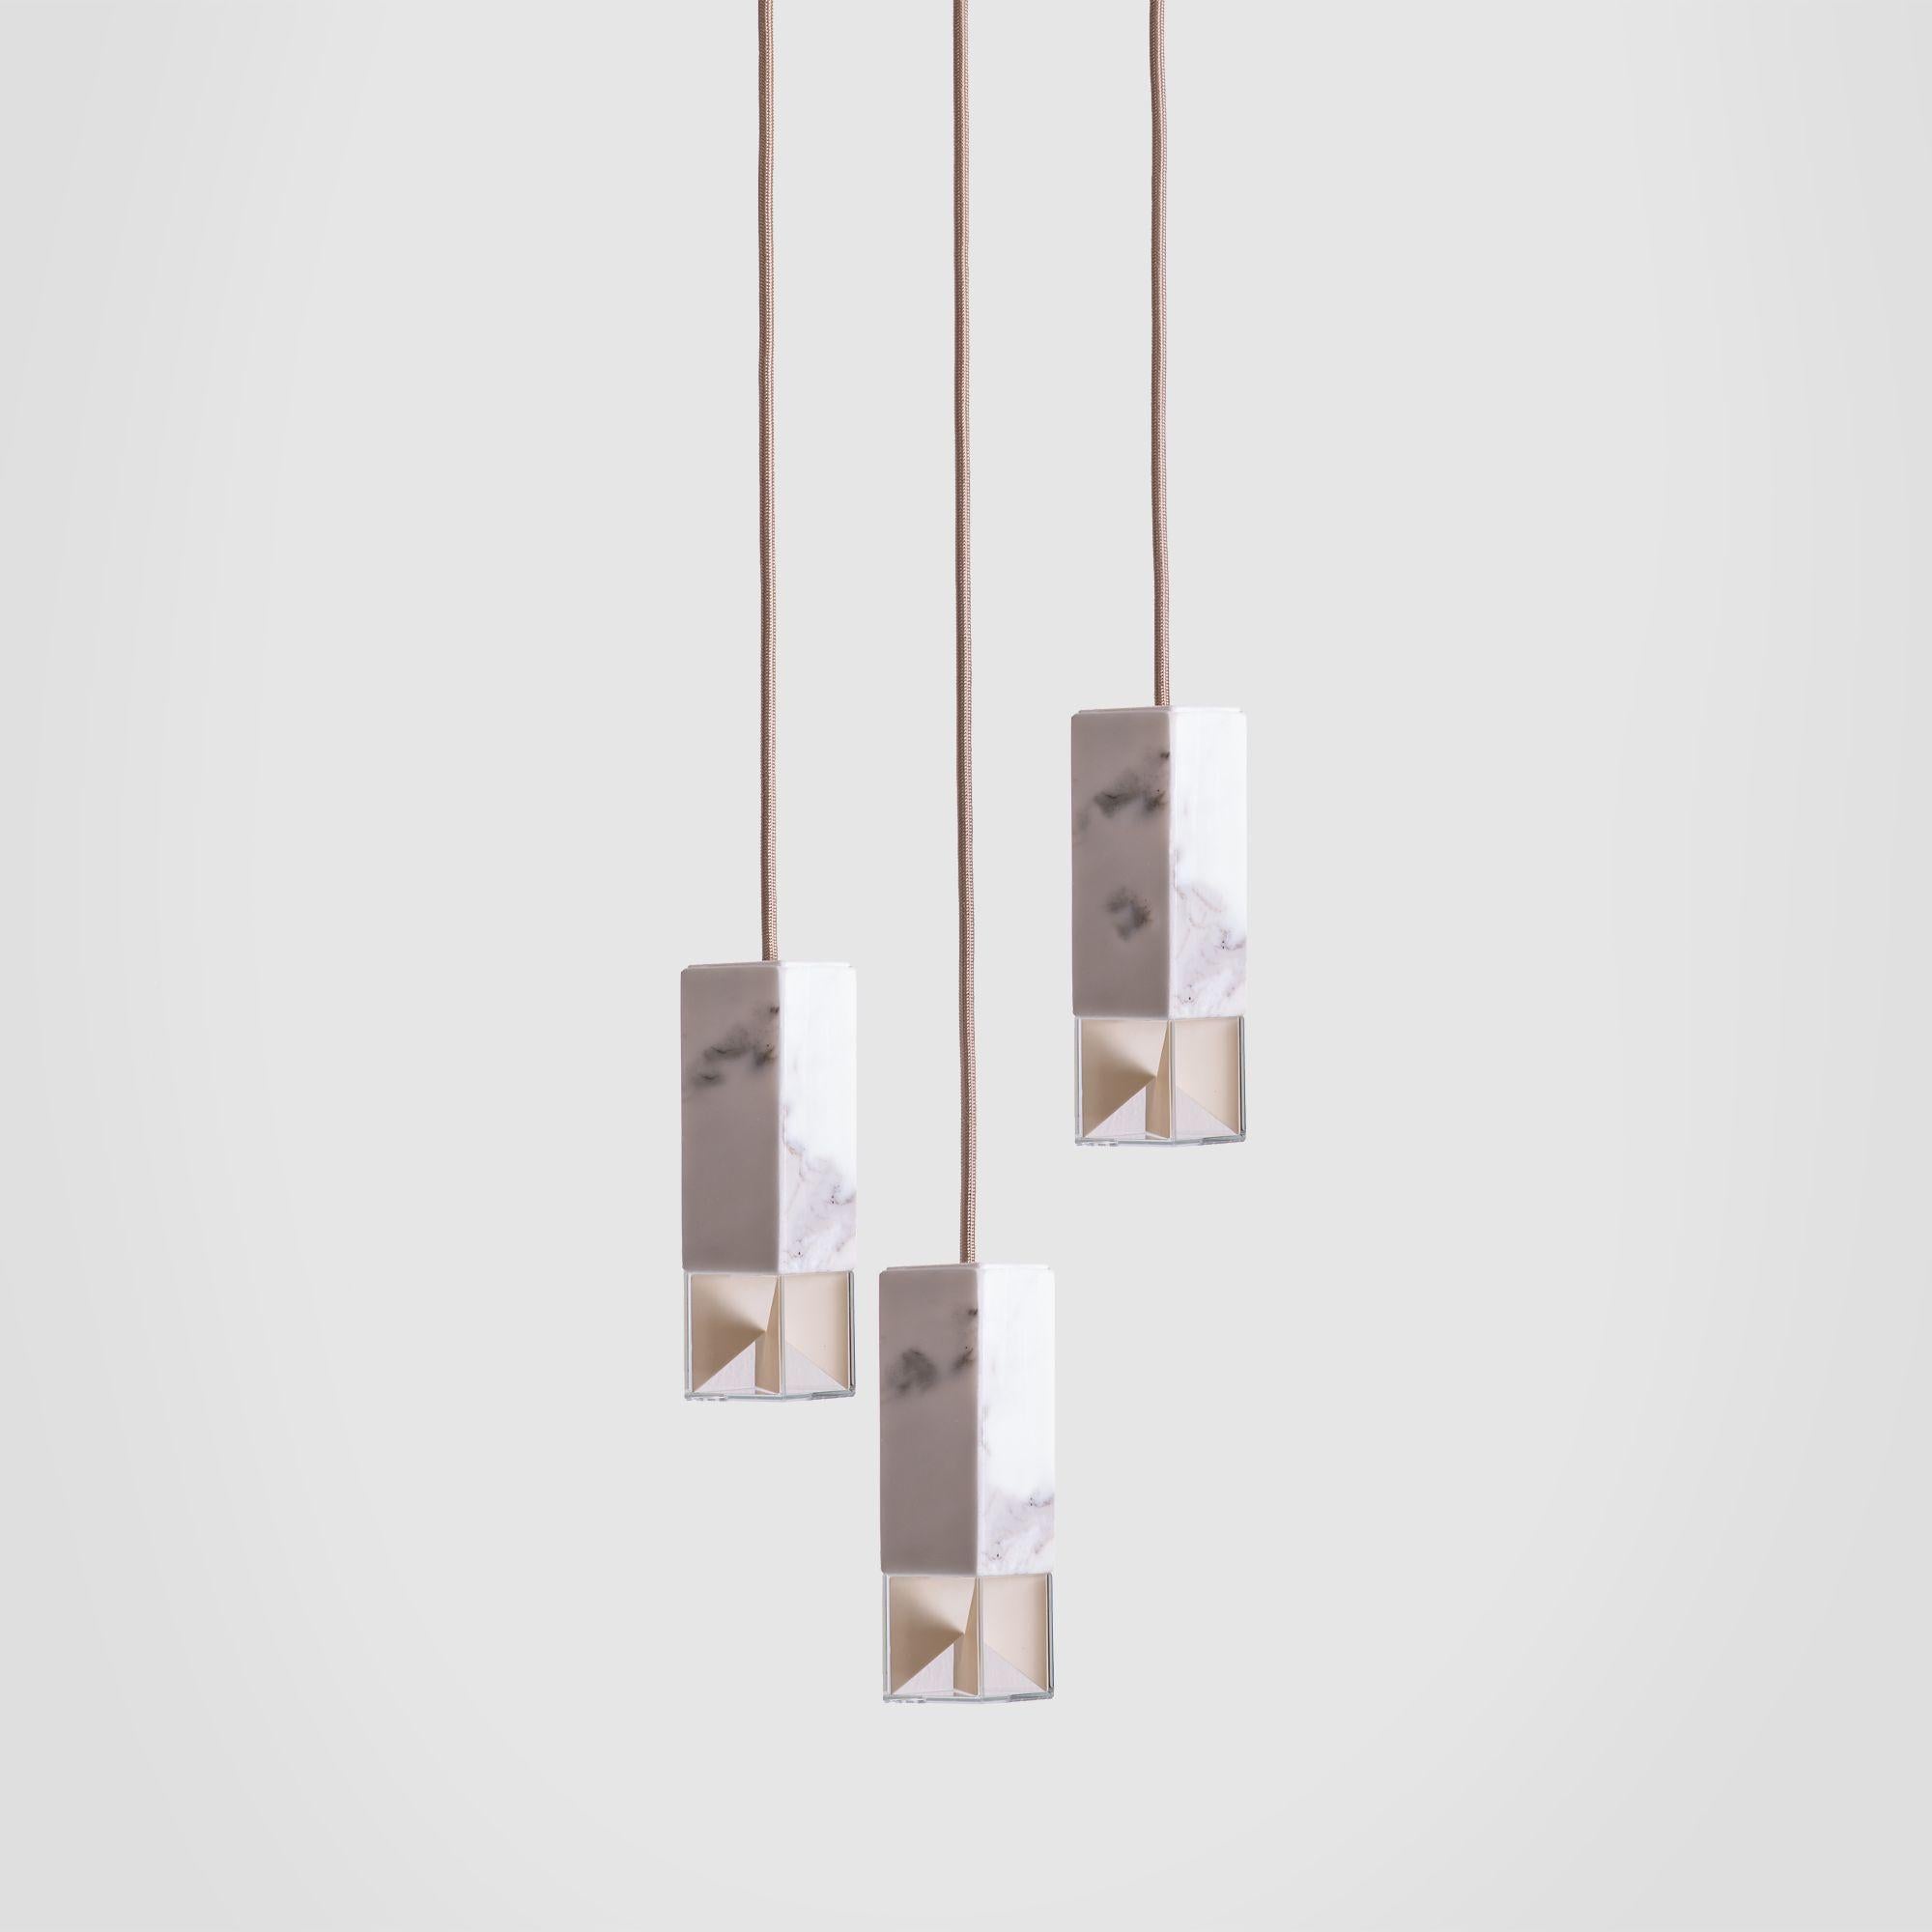 Lamp one trio chandelier in marble by Formaminima.
Dimensions: 30 x 30 x H 68 cm.
Materials: marble.

All our lamps can be wired according to each country. If sold to the USA it will be wired for the USA for instance.

light source supplied